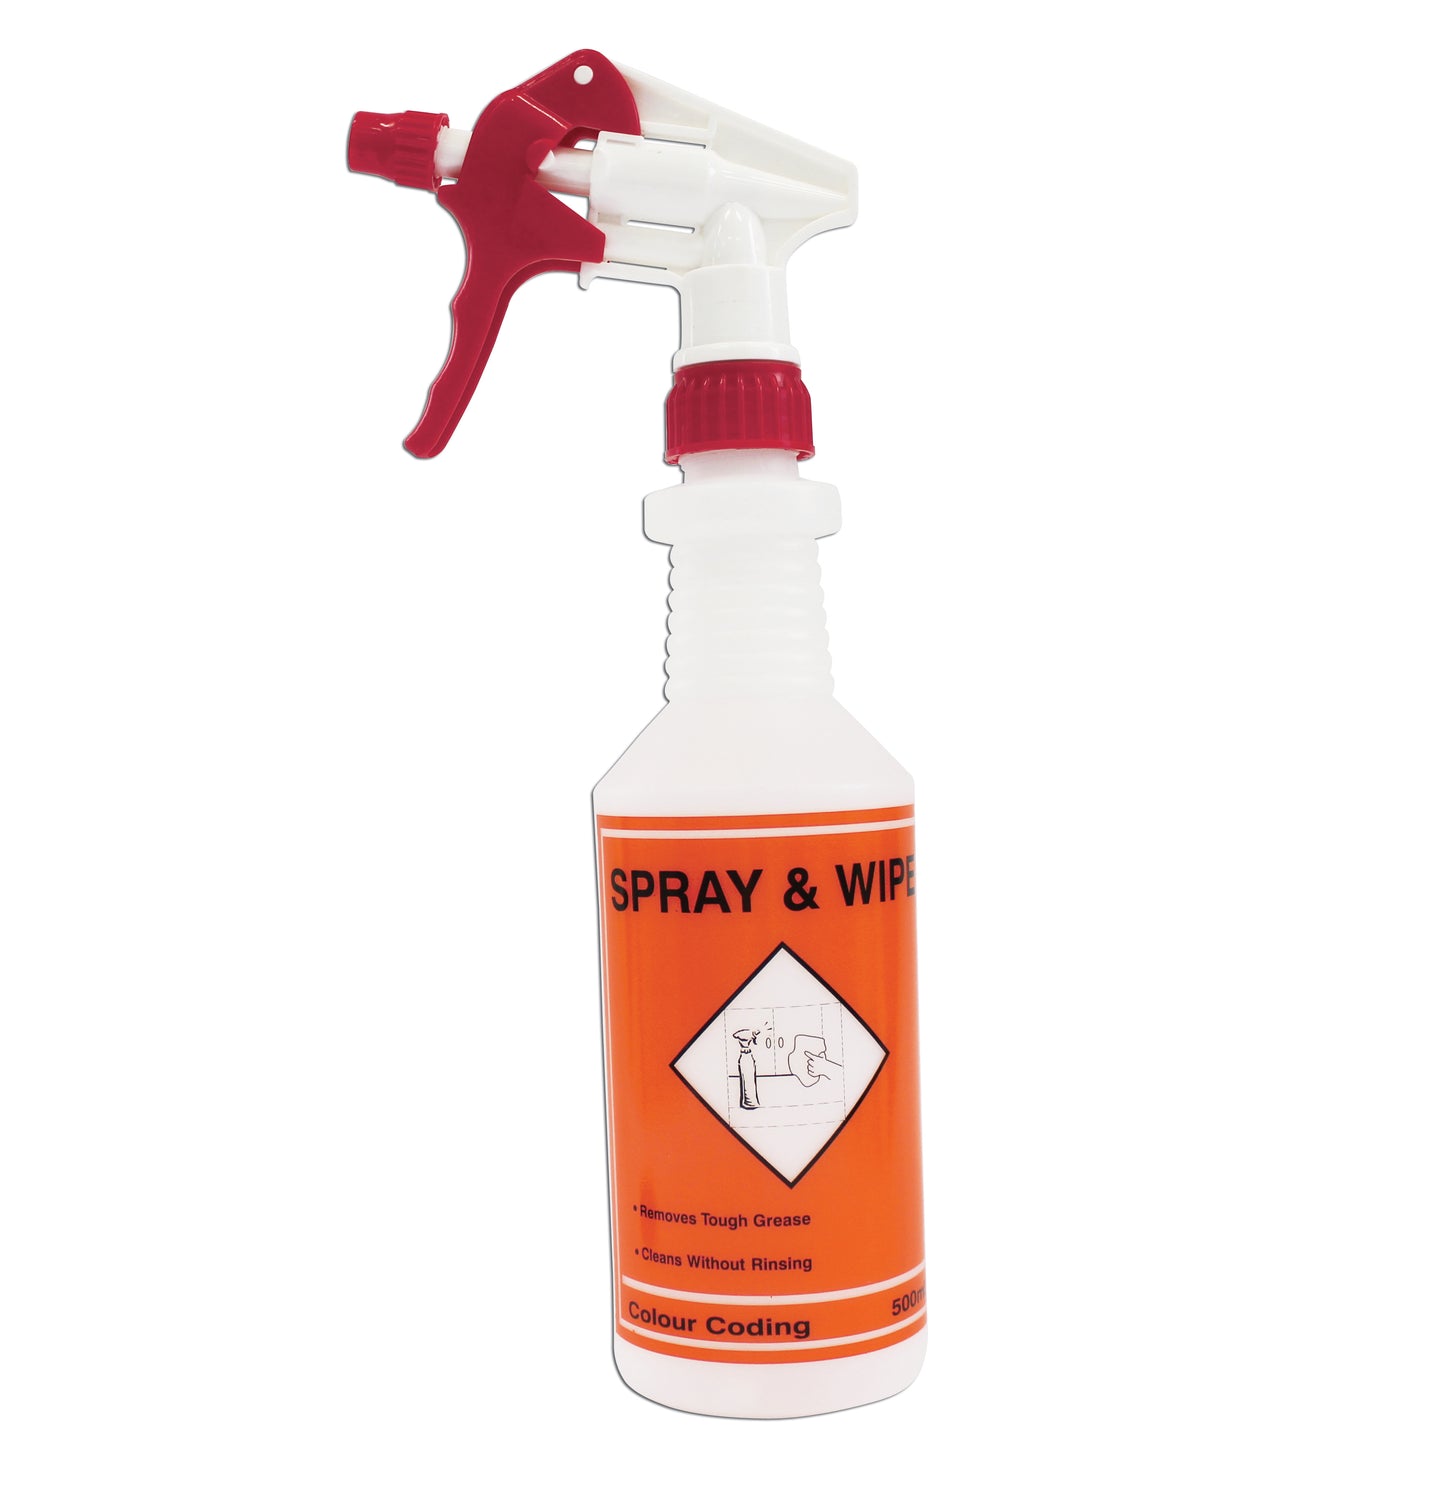 Screen Printed Spray Bottle with Trigger - Spray & Wipe 500ml